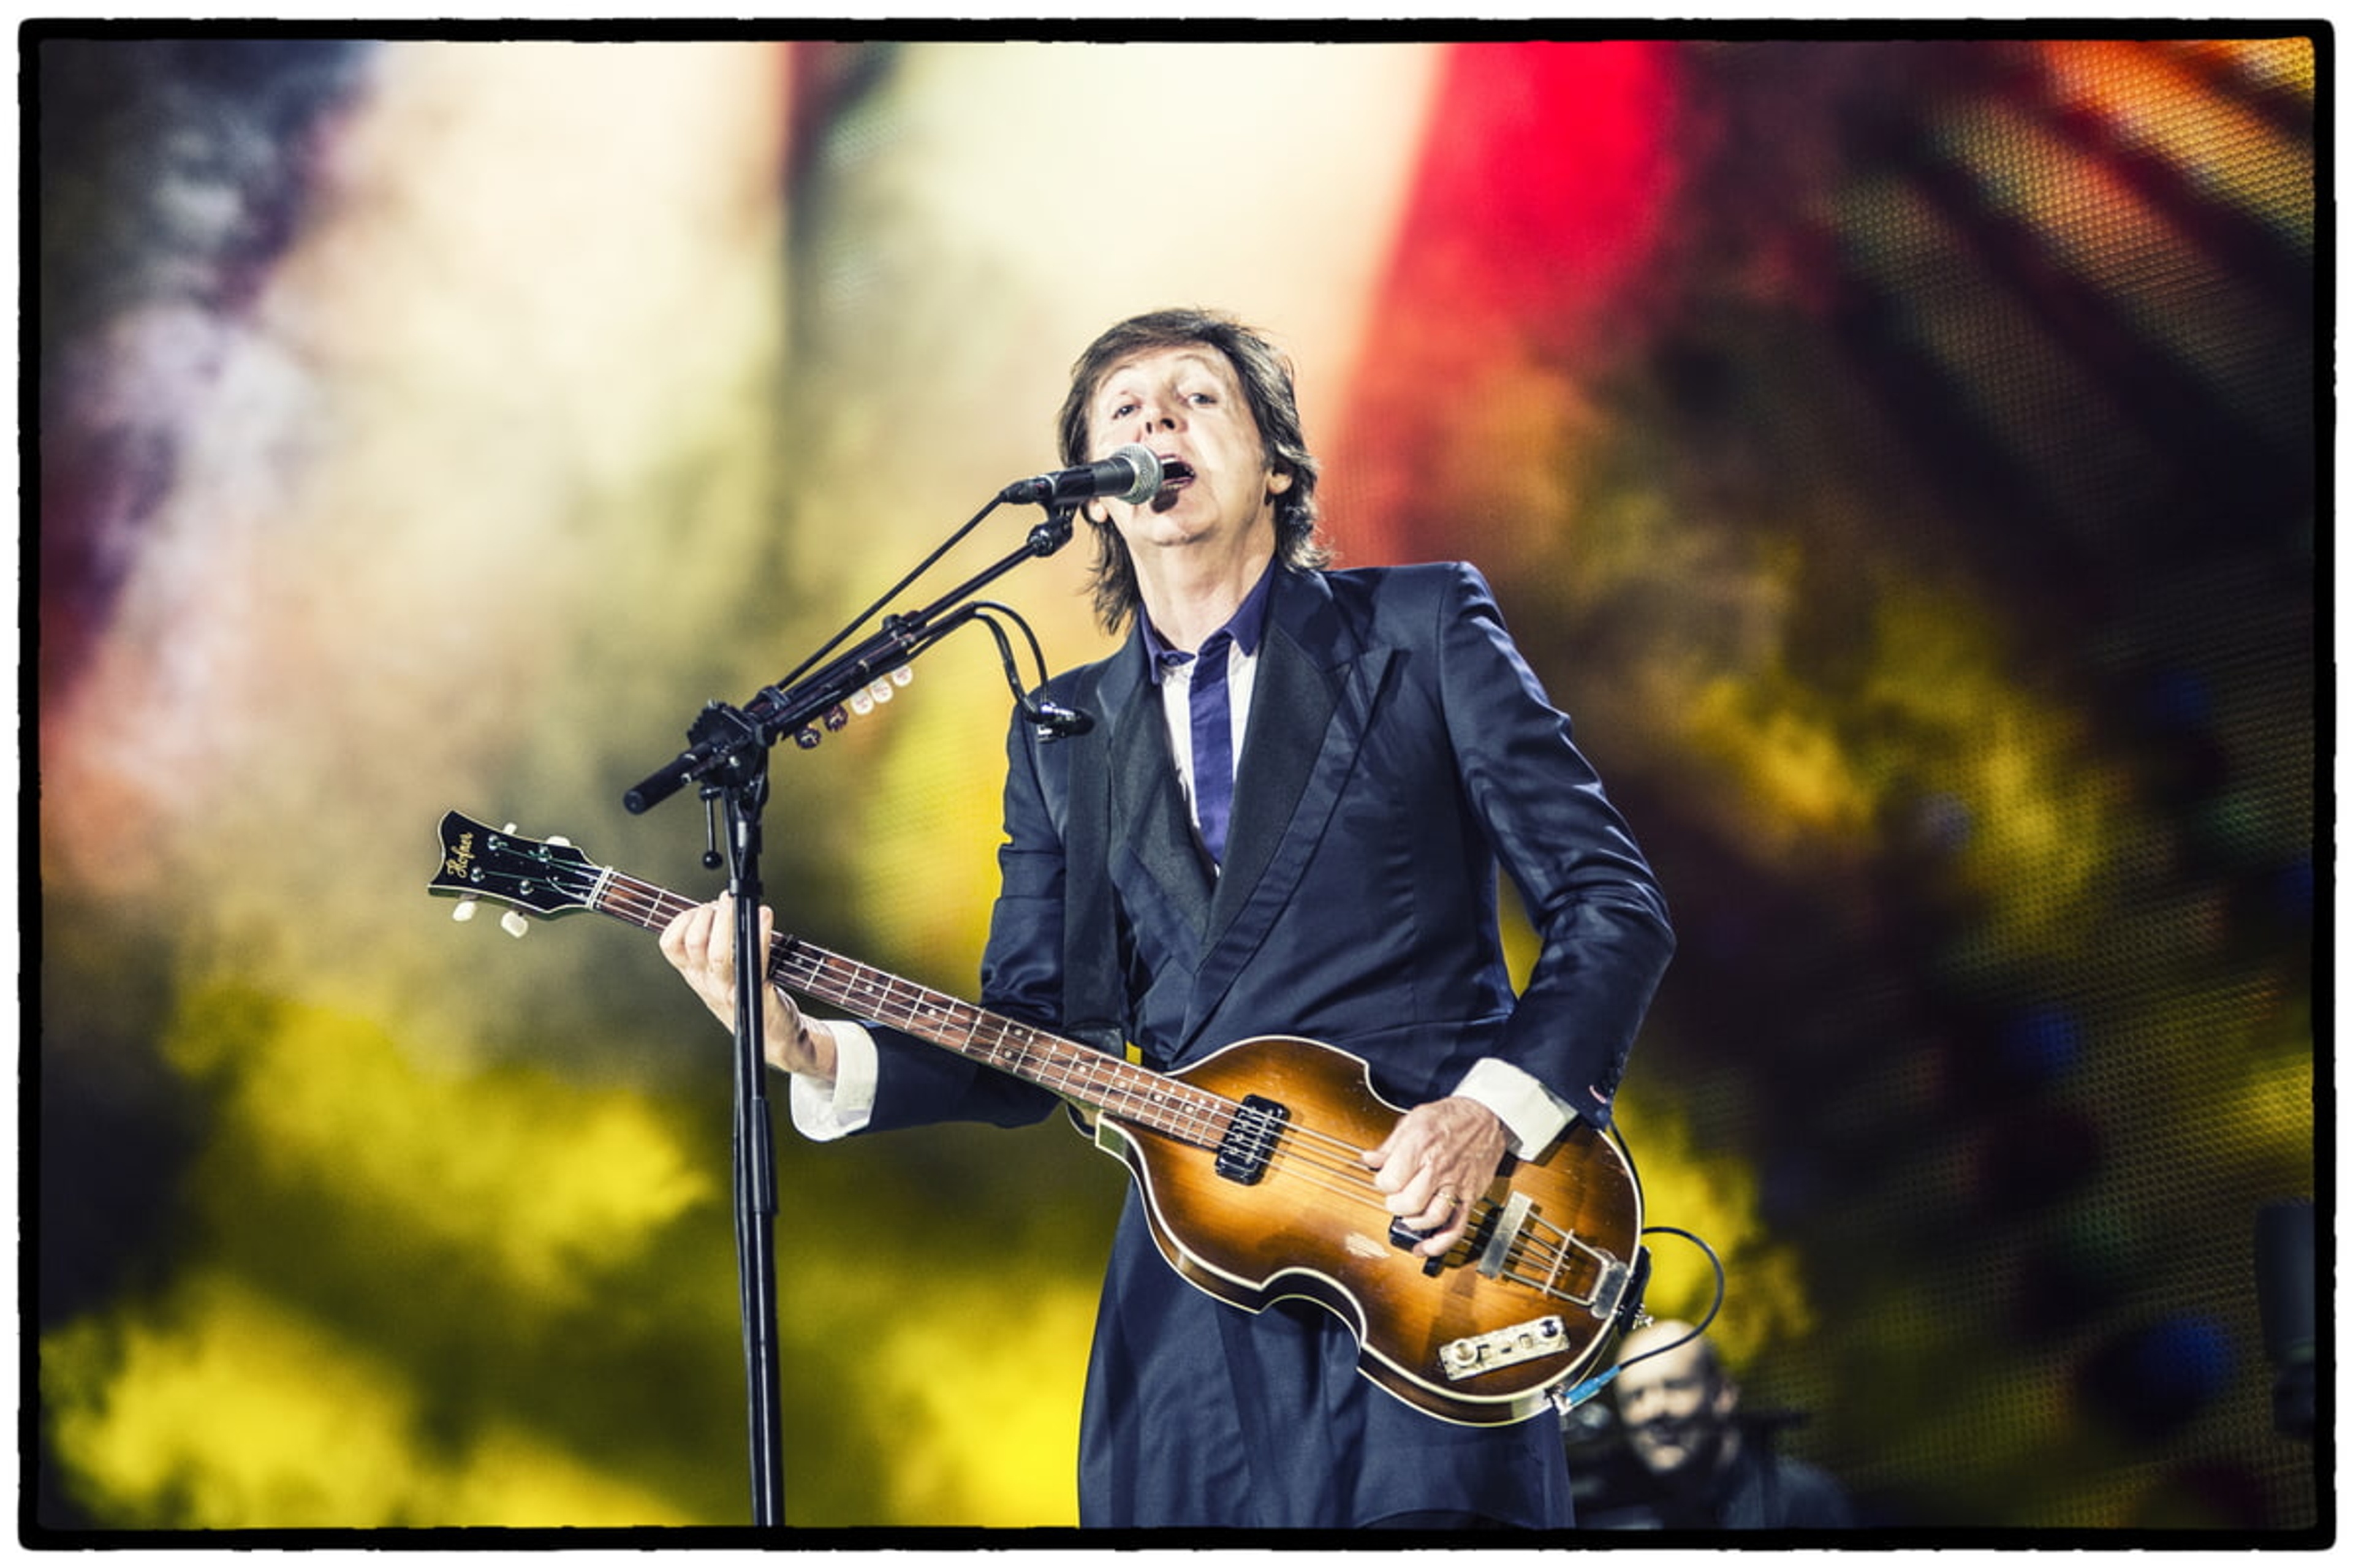 Paul with his Höfner bass, National Stadium, Warsaw, 22nd June 2013